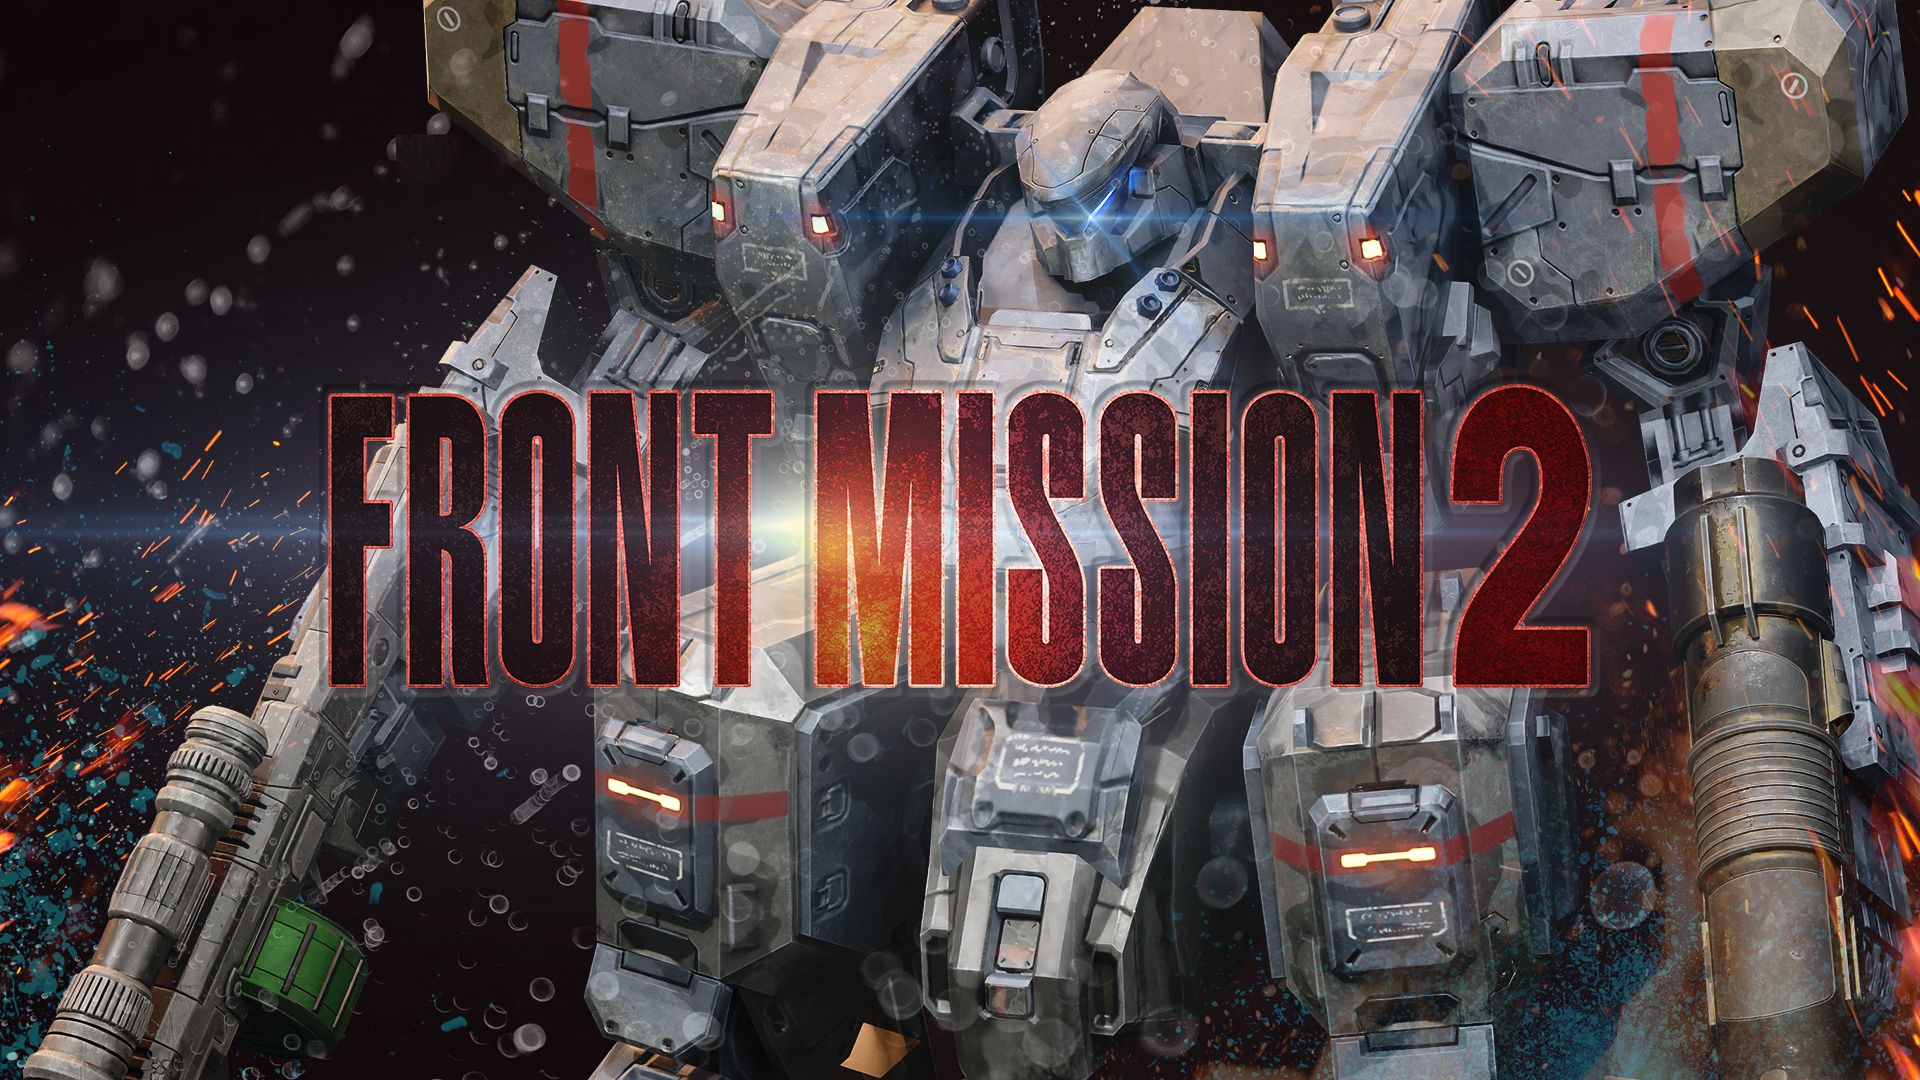  Front Mission Evolved - Playstation 3 : Square Enix